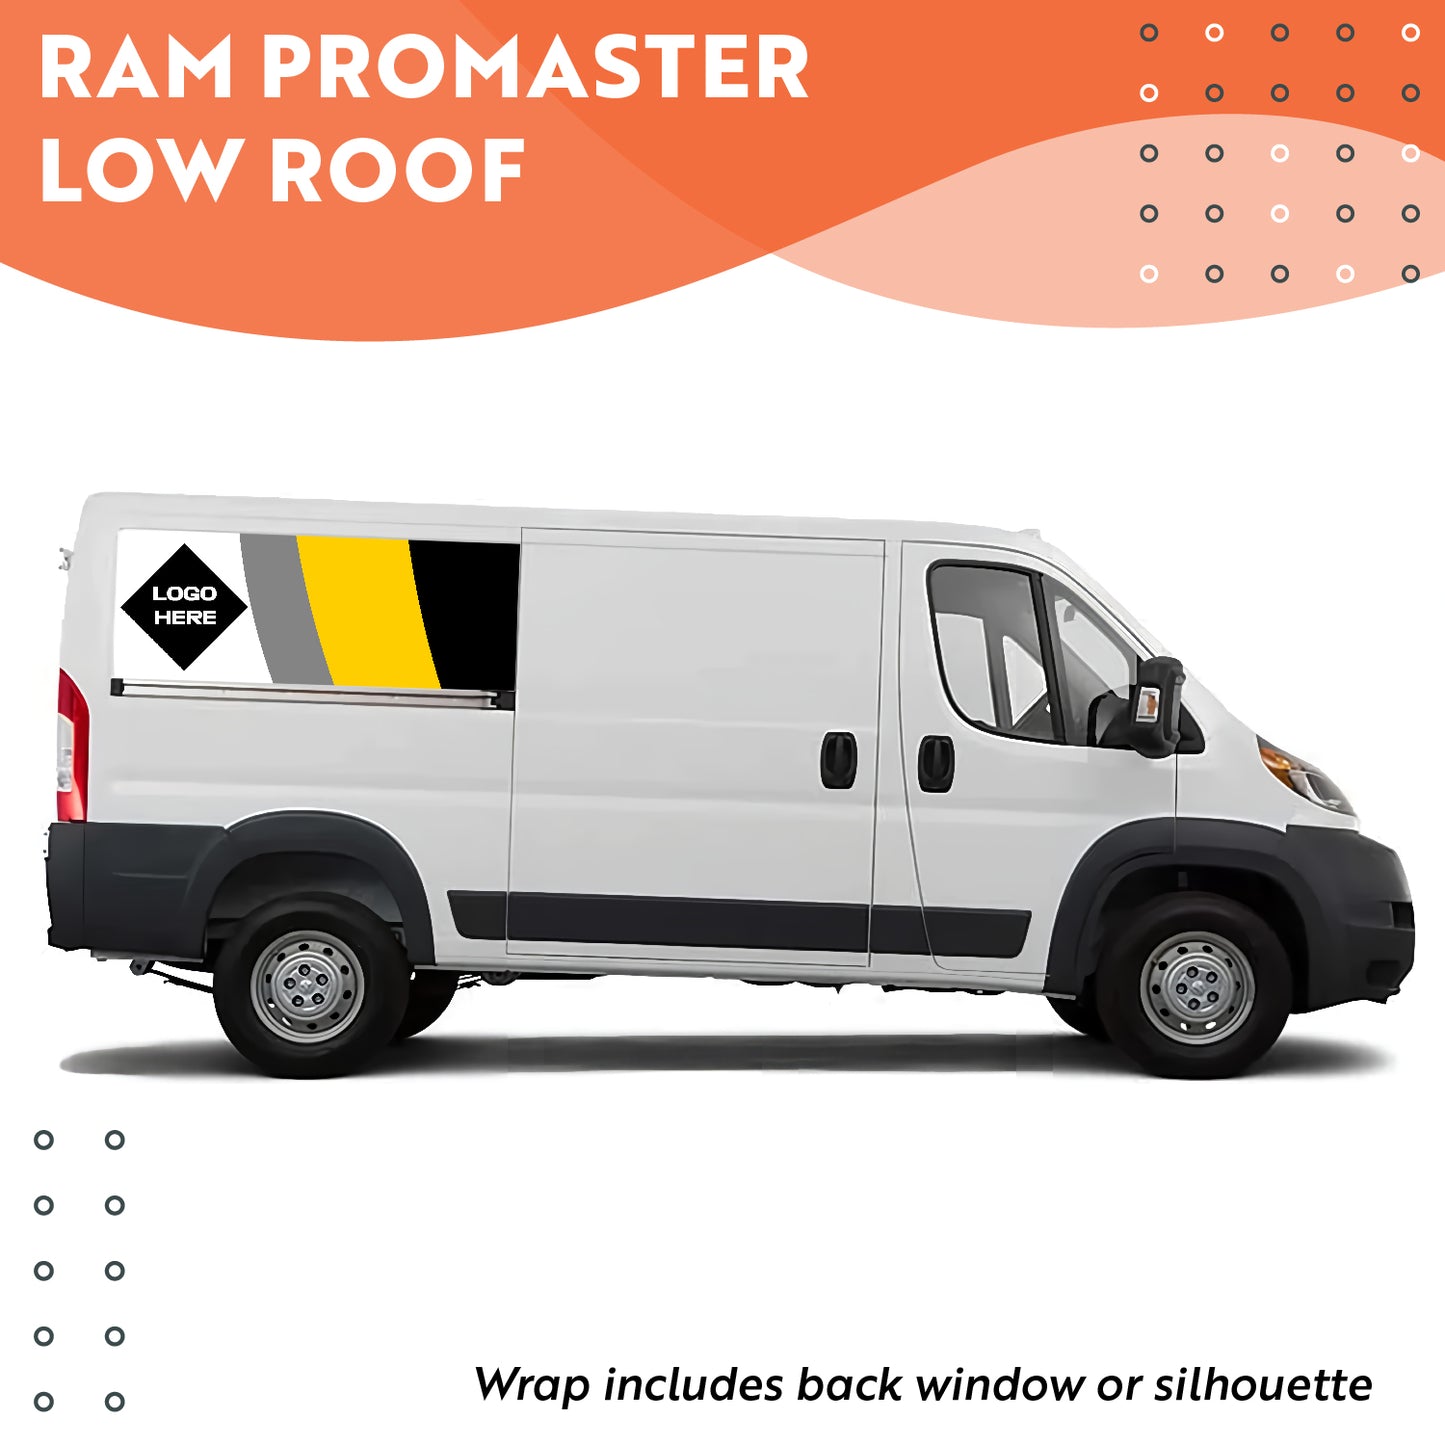 RAM Promaster Low Roof